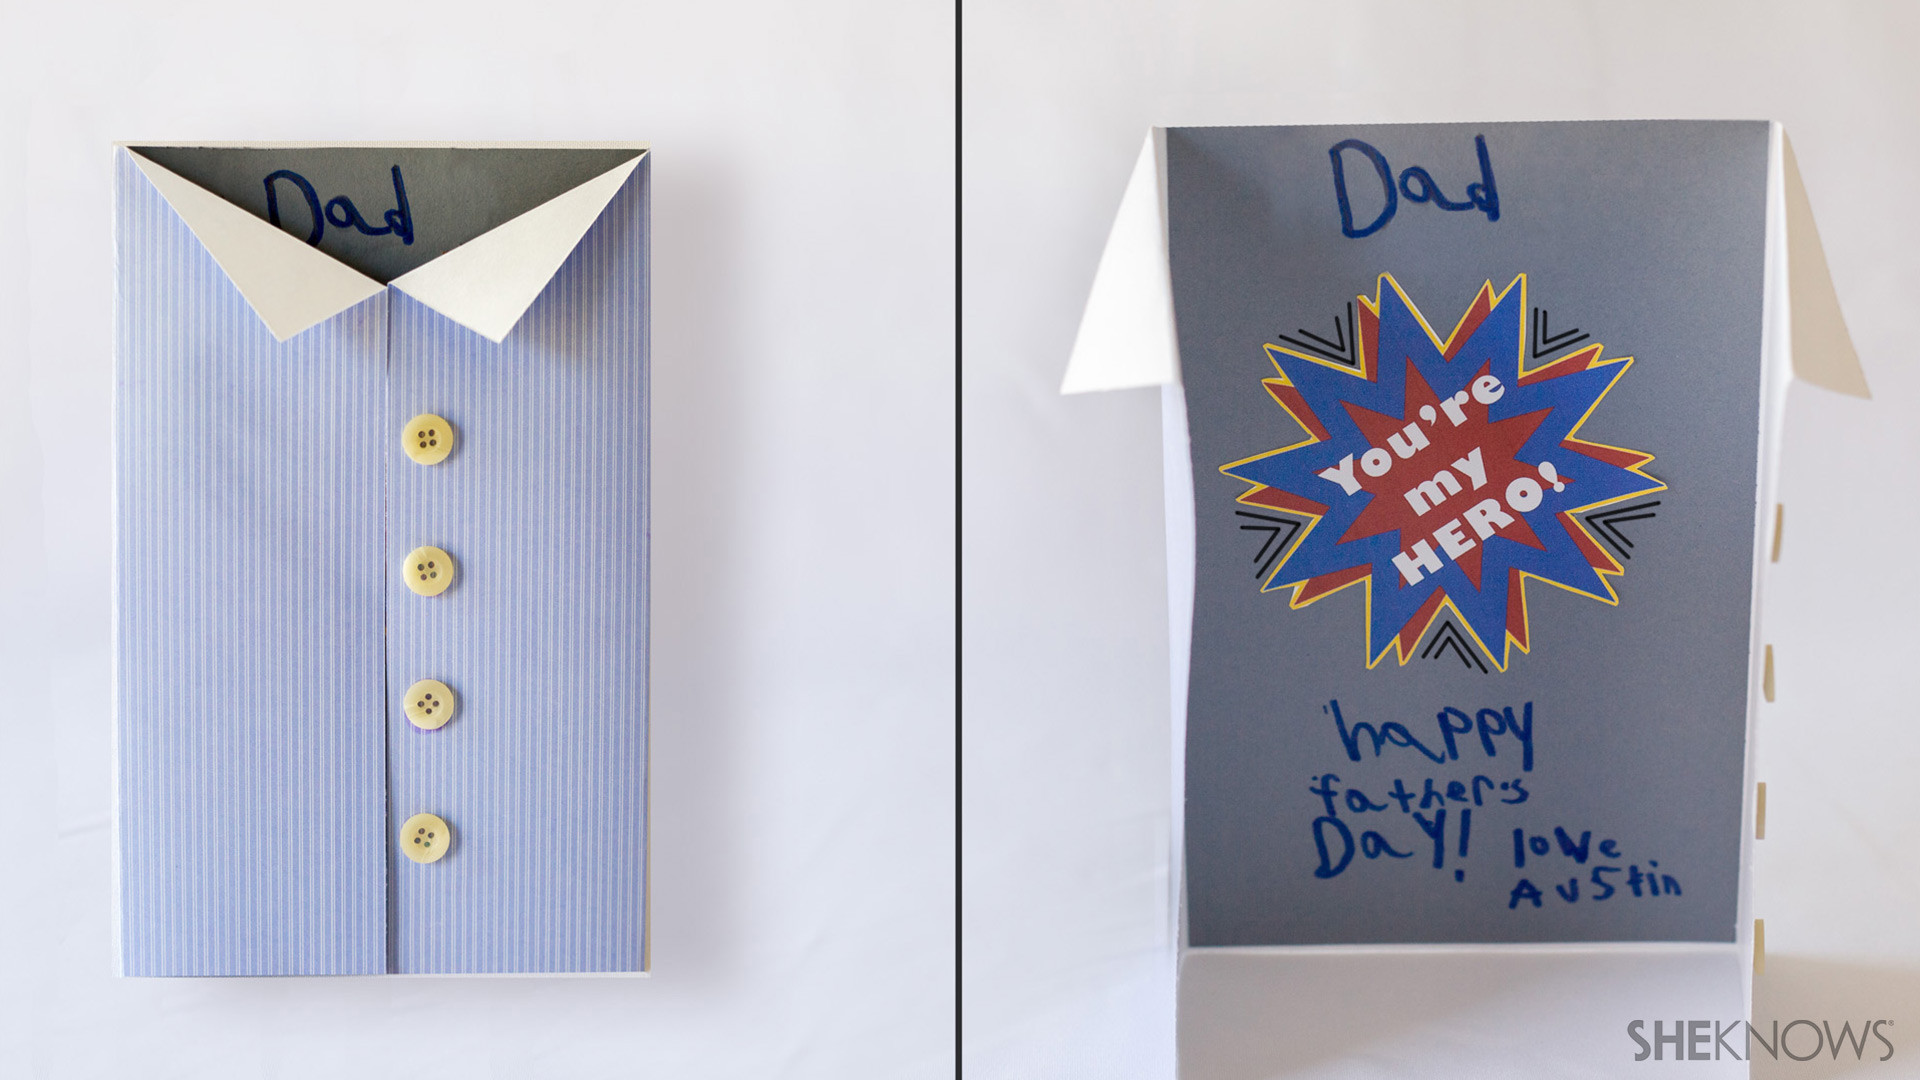 Homemade Fathers Day Card Ideas
 DIY Father s Day card ideas